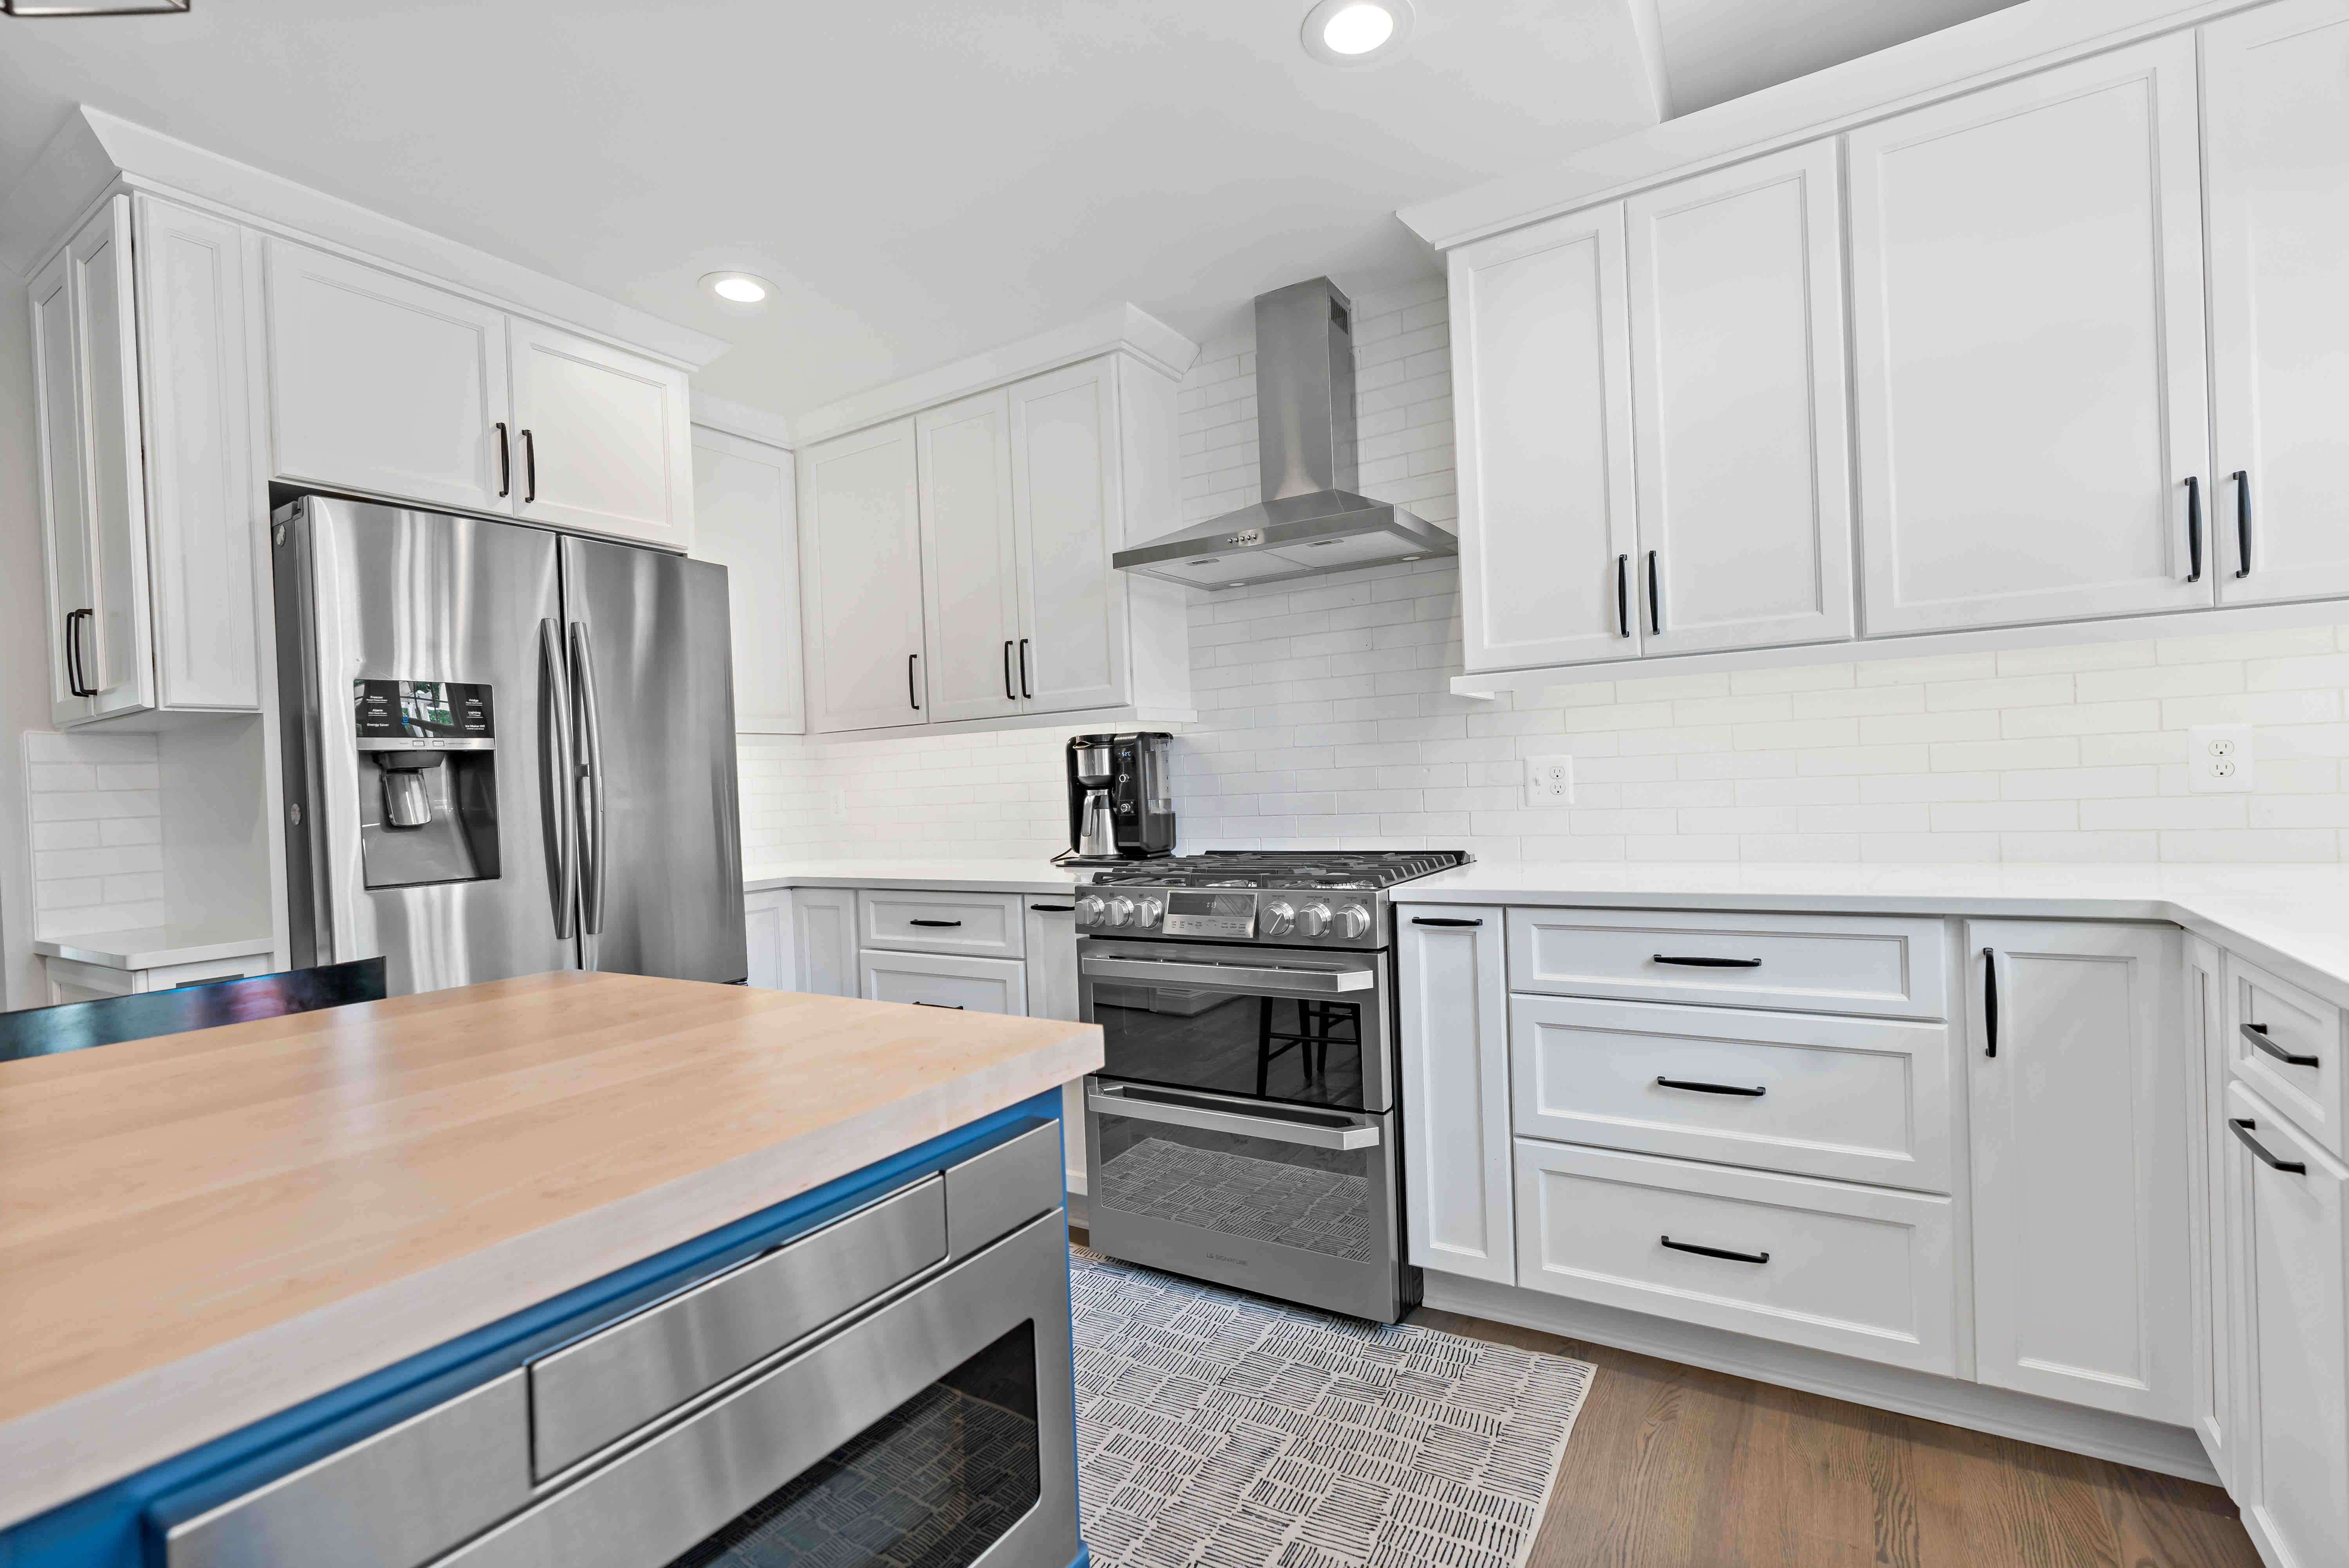 All white kitchen cabinets with silver appliances